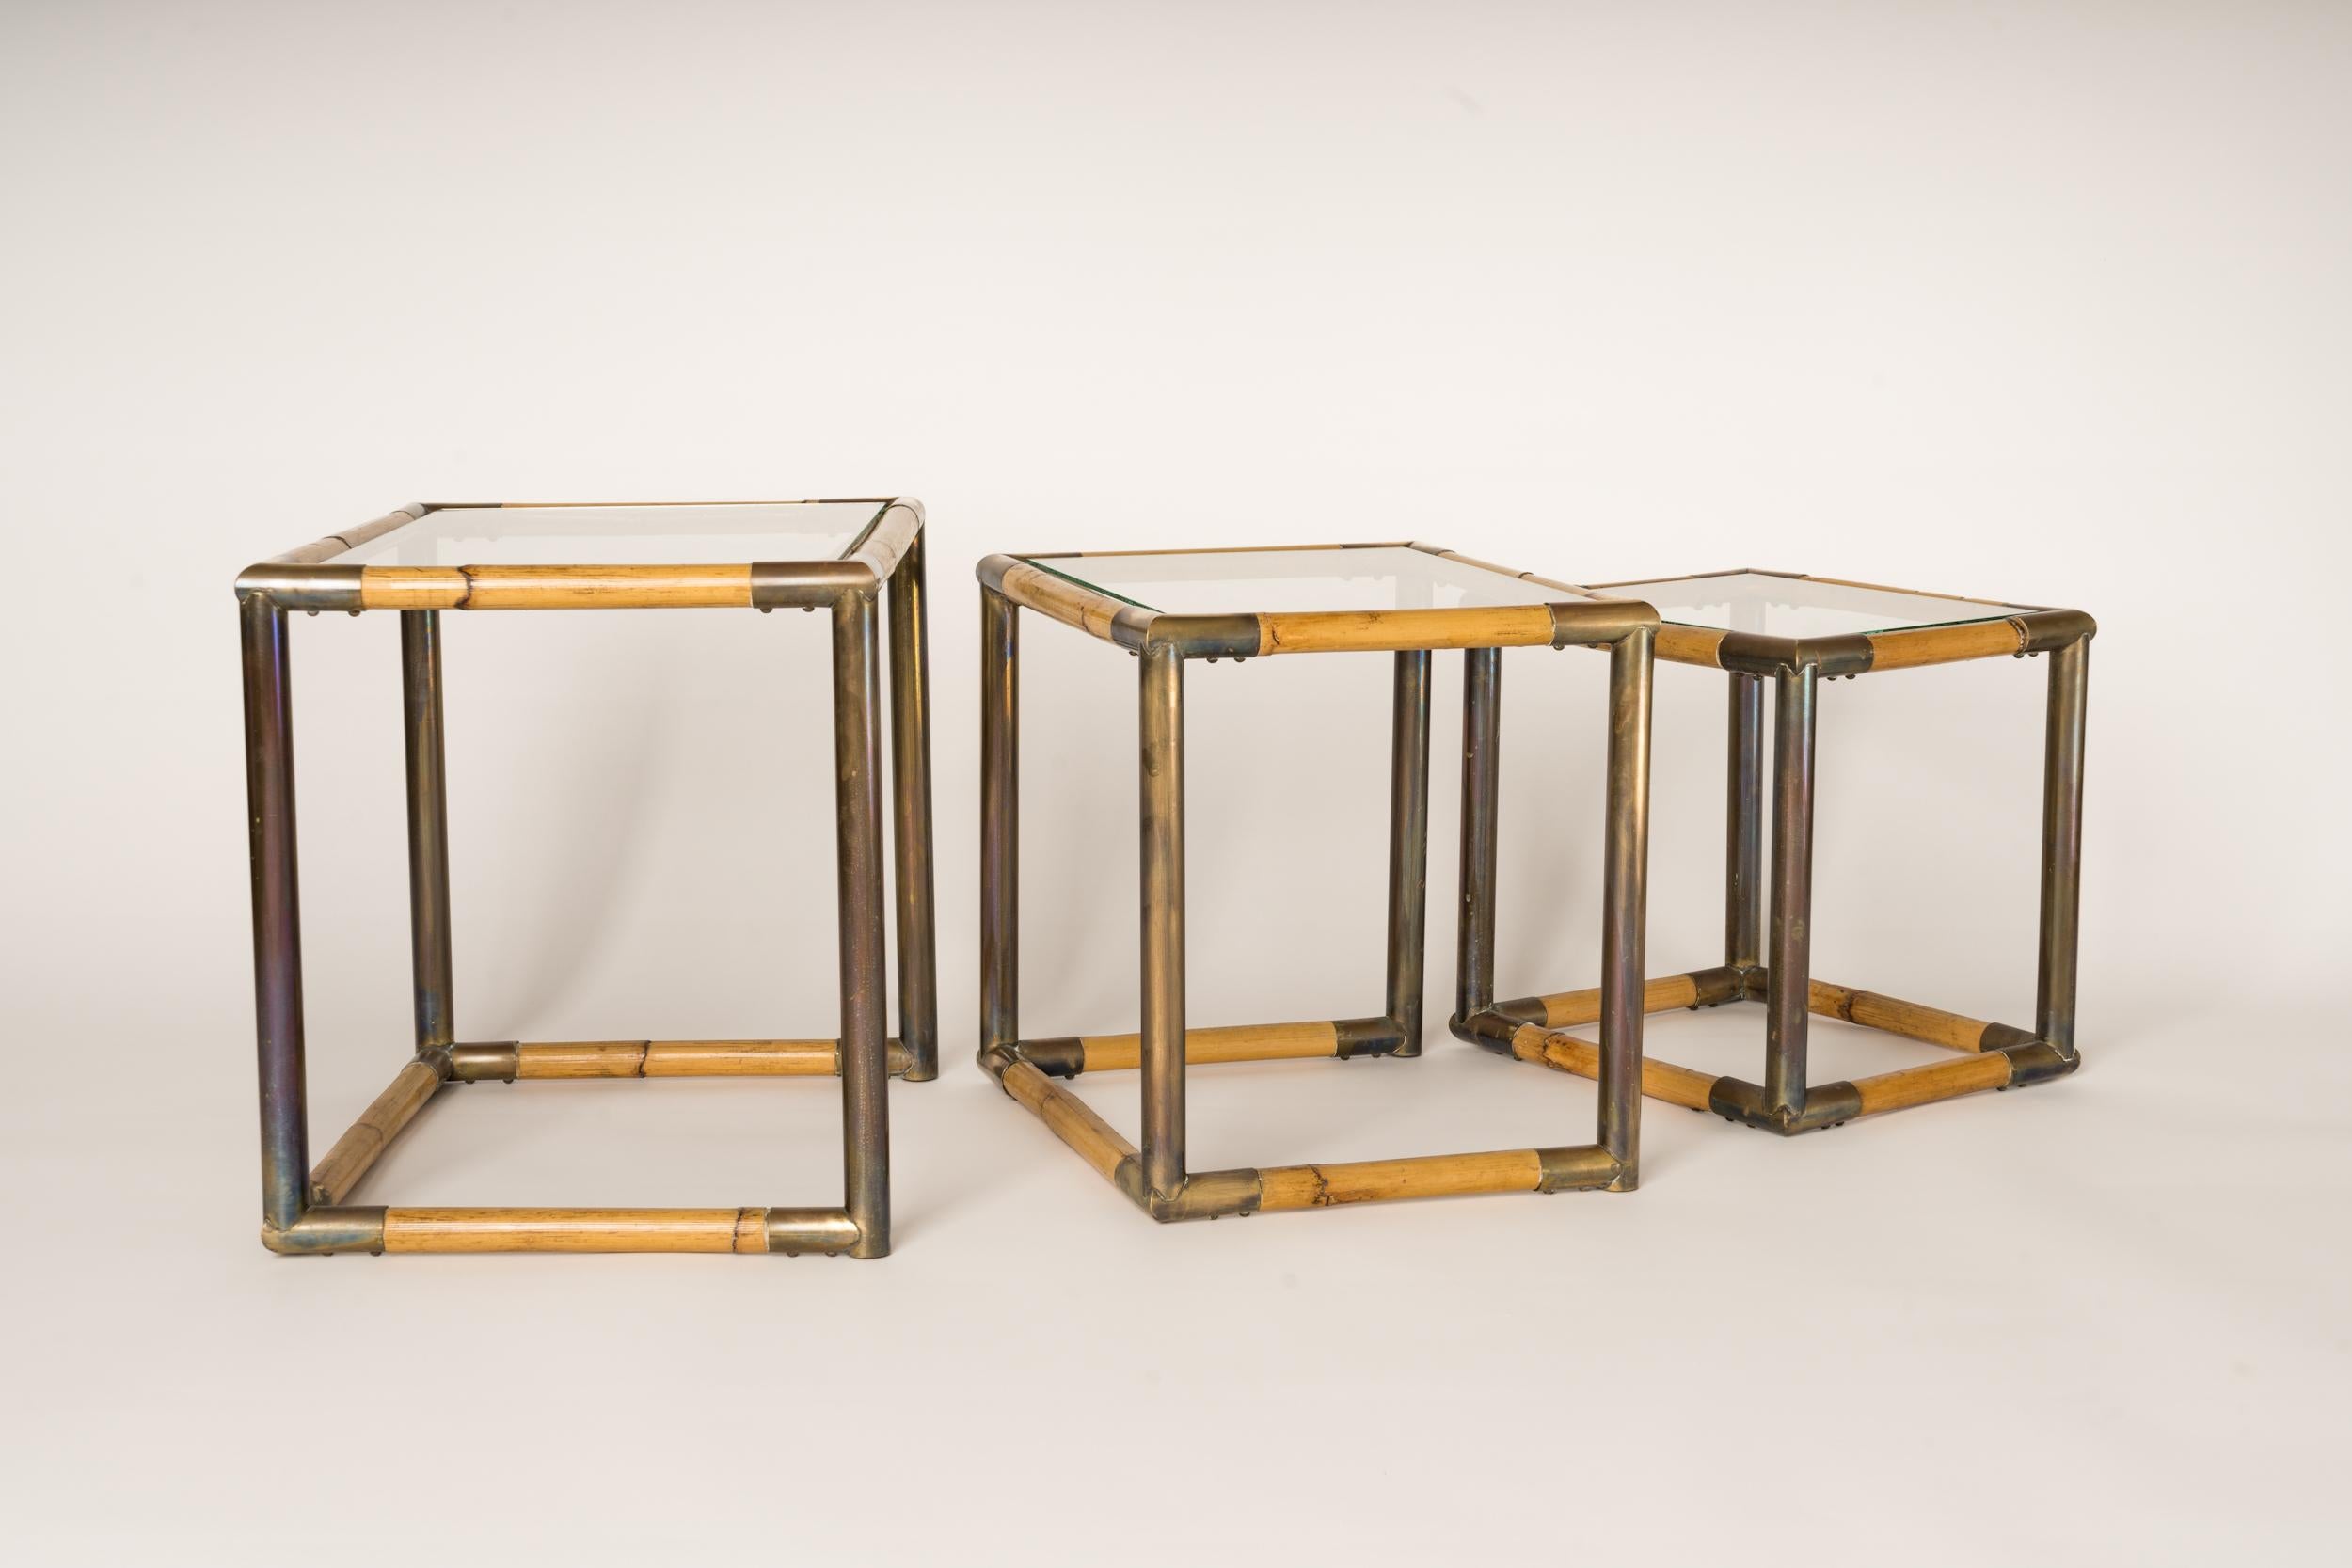 Set of Three Bamboo & Brass Nesting Tables, Italy, 1970's For Sale 3